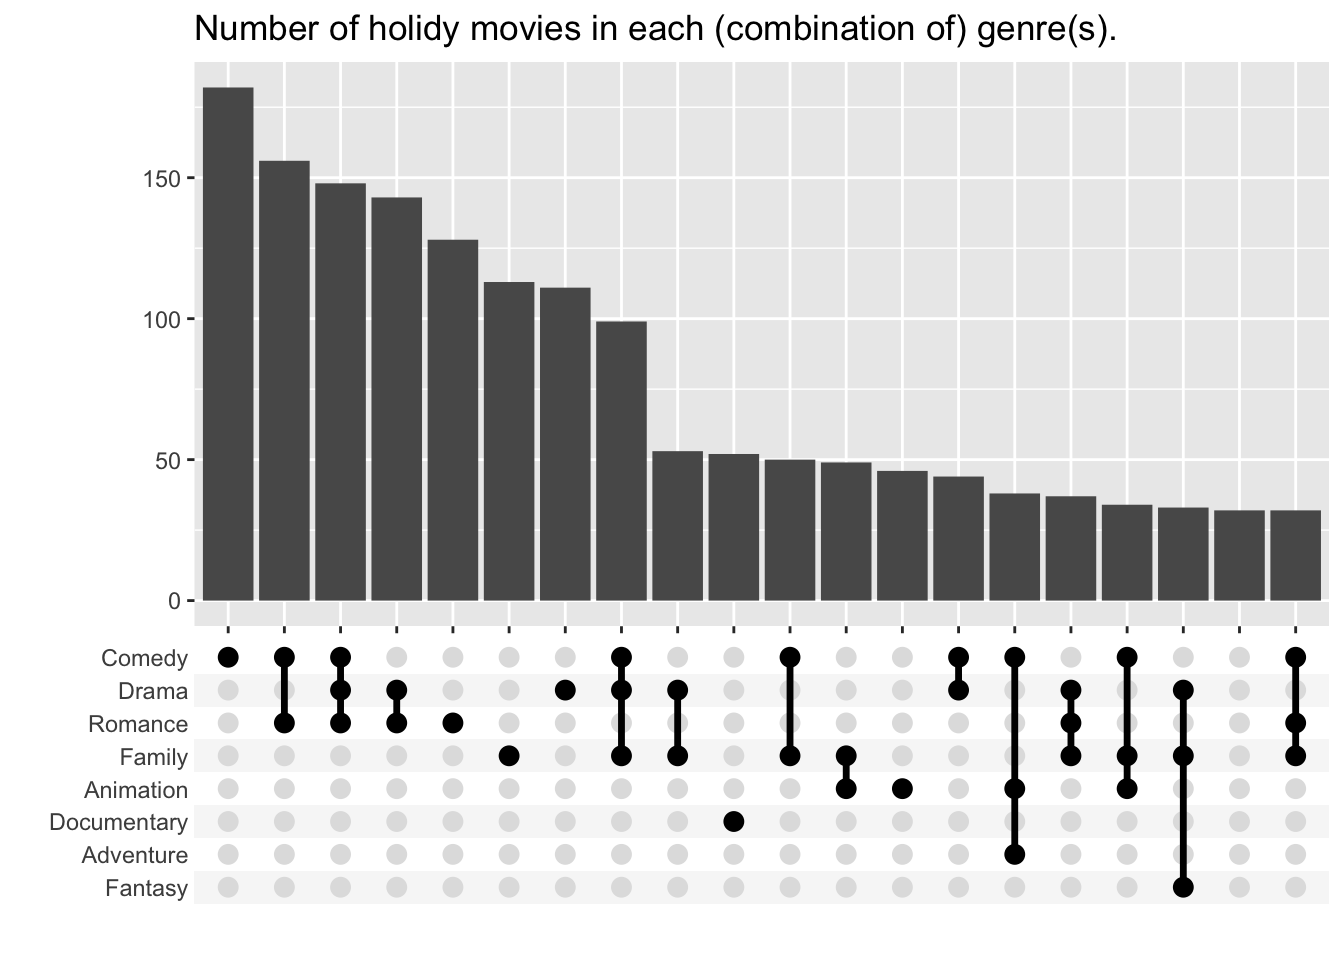 An upset plot with genre combinations on the x-axis and frequency on the y-axis.  Comedy is the most popular genre, closely followed by Comedy-Romance pair of genres.